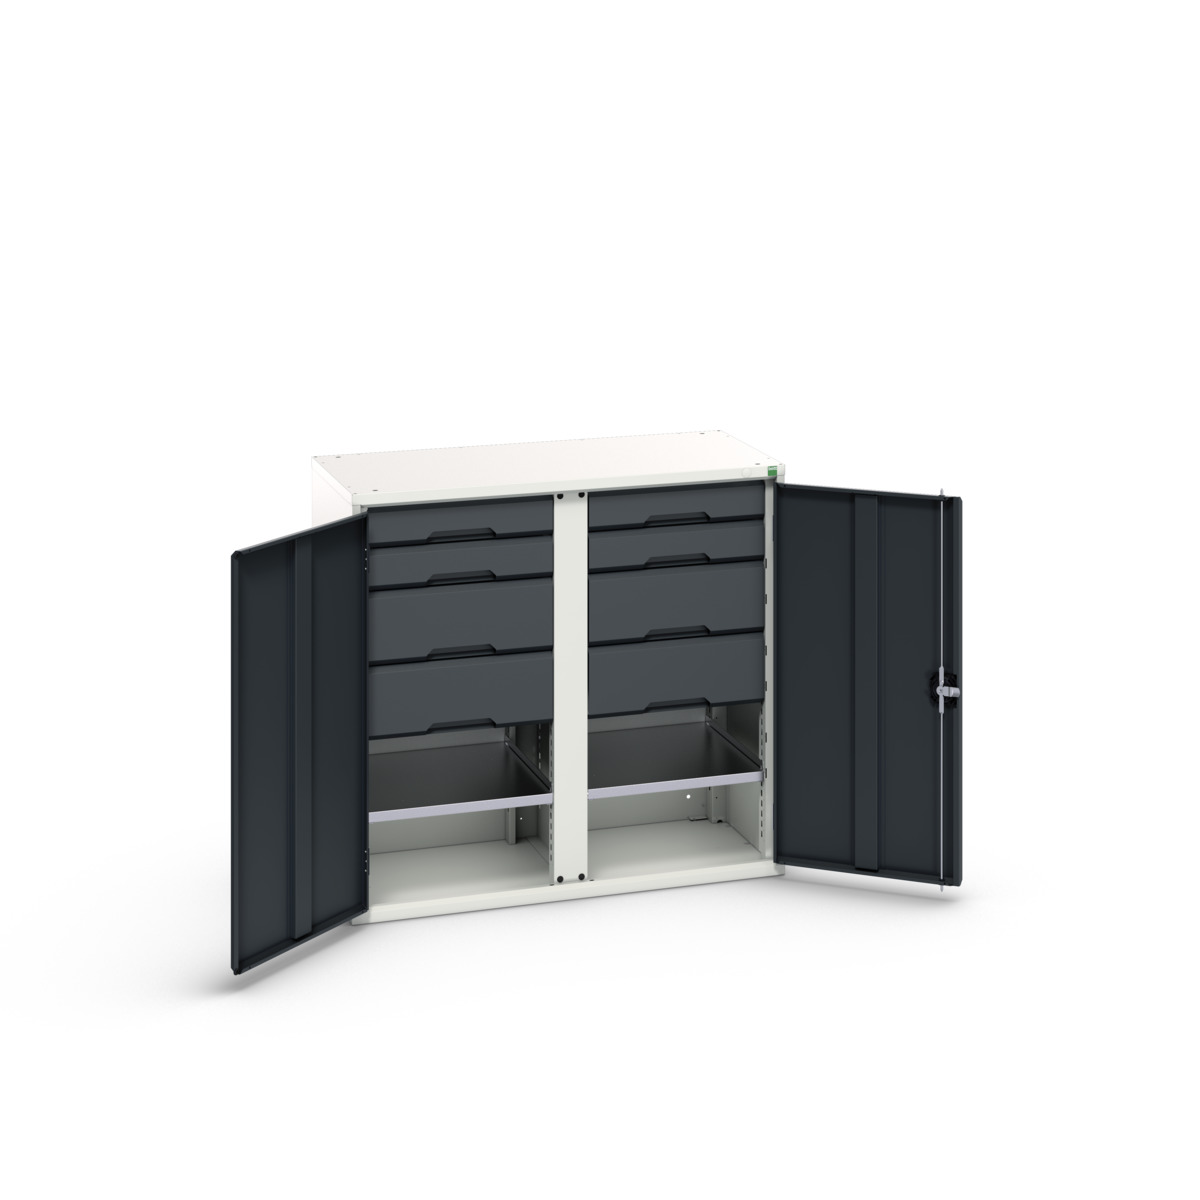 16926557. - verso kitted cupboard